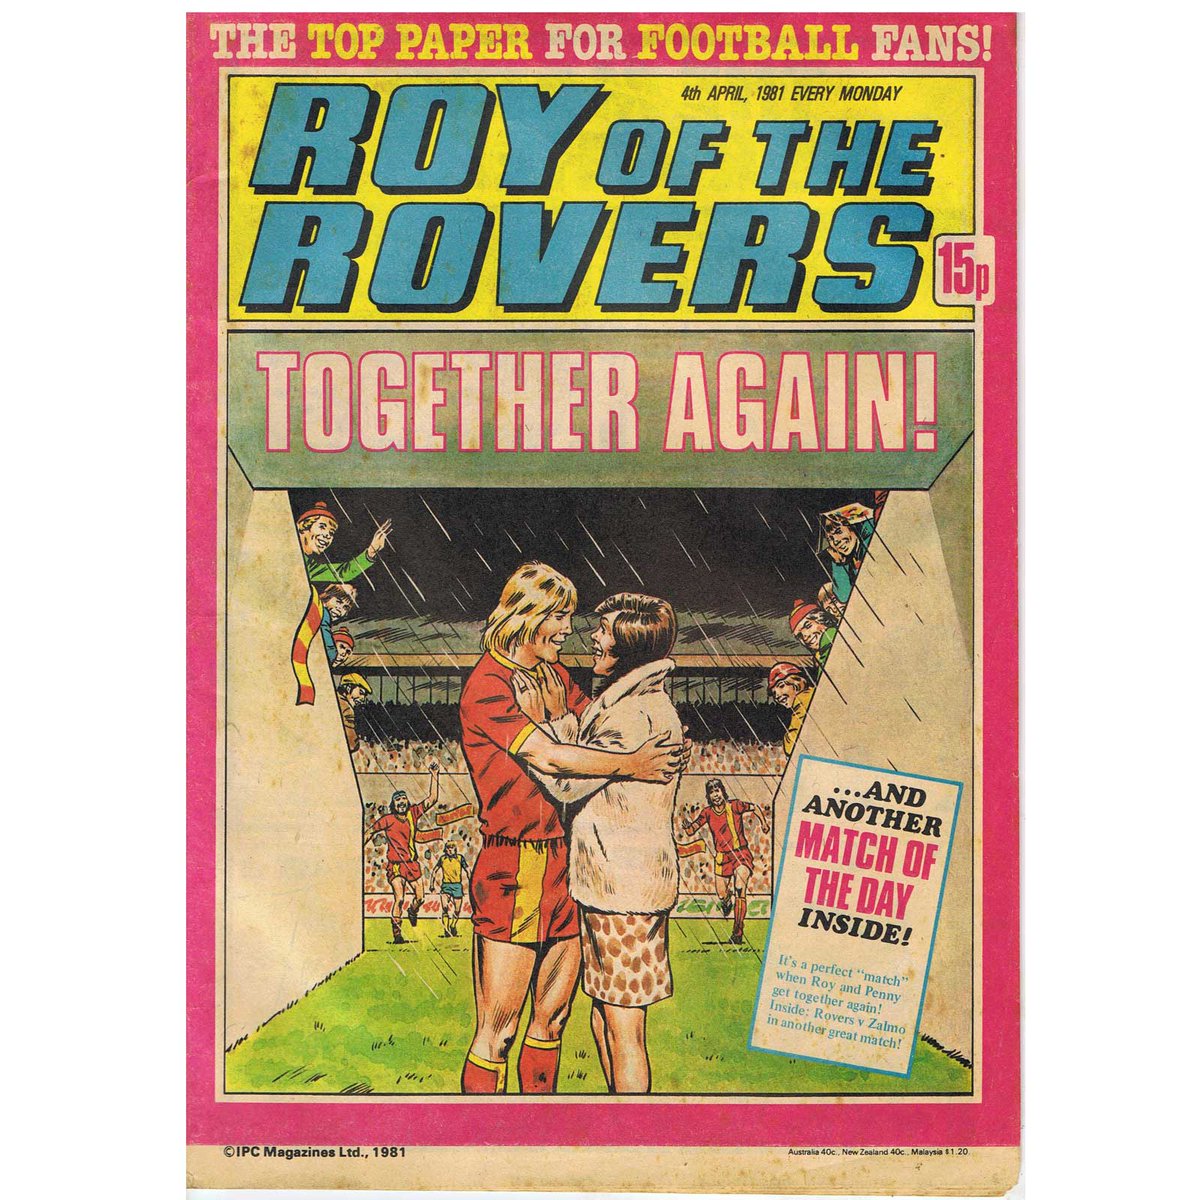 This week in Roy of the Rovers, 1981: Roy and Penny were back together again. I thought we should have a happy ending!